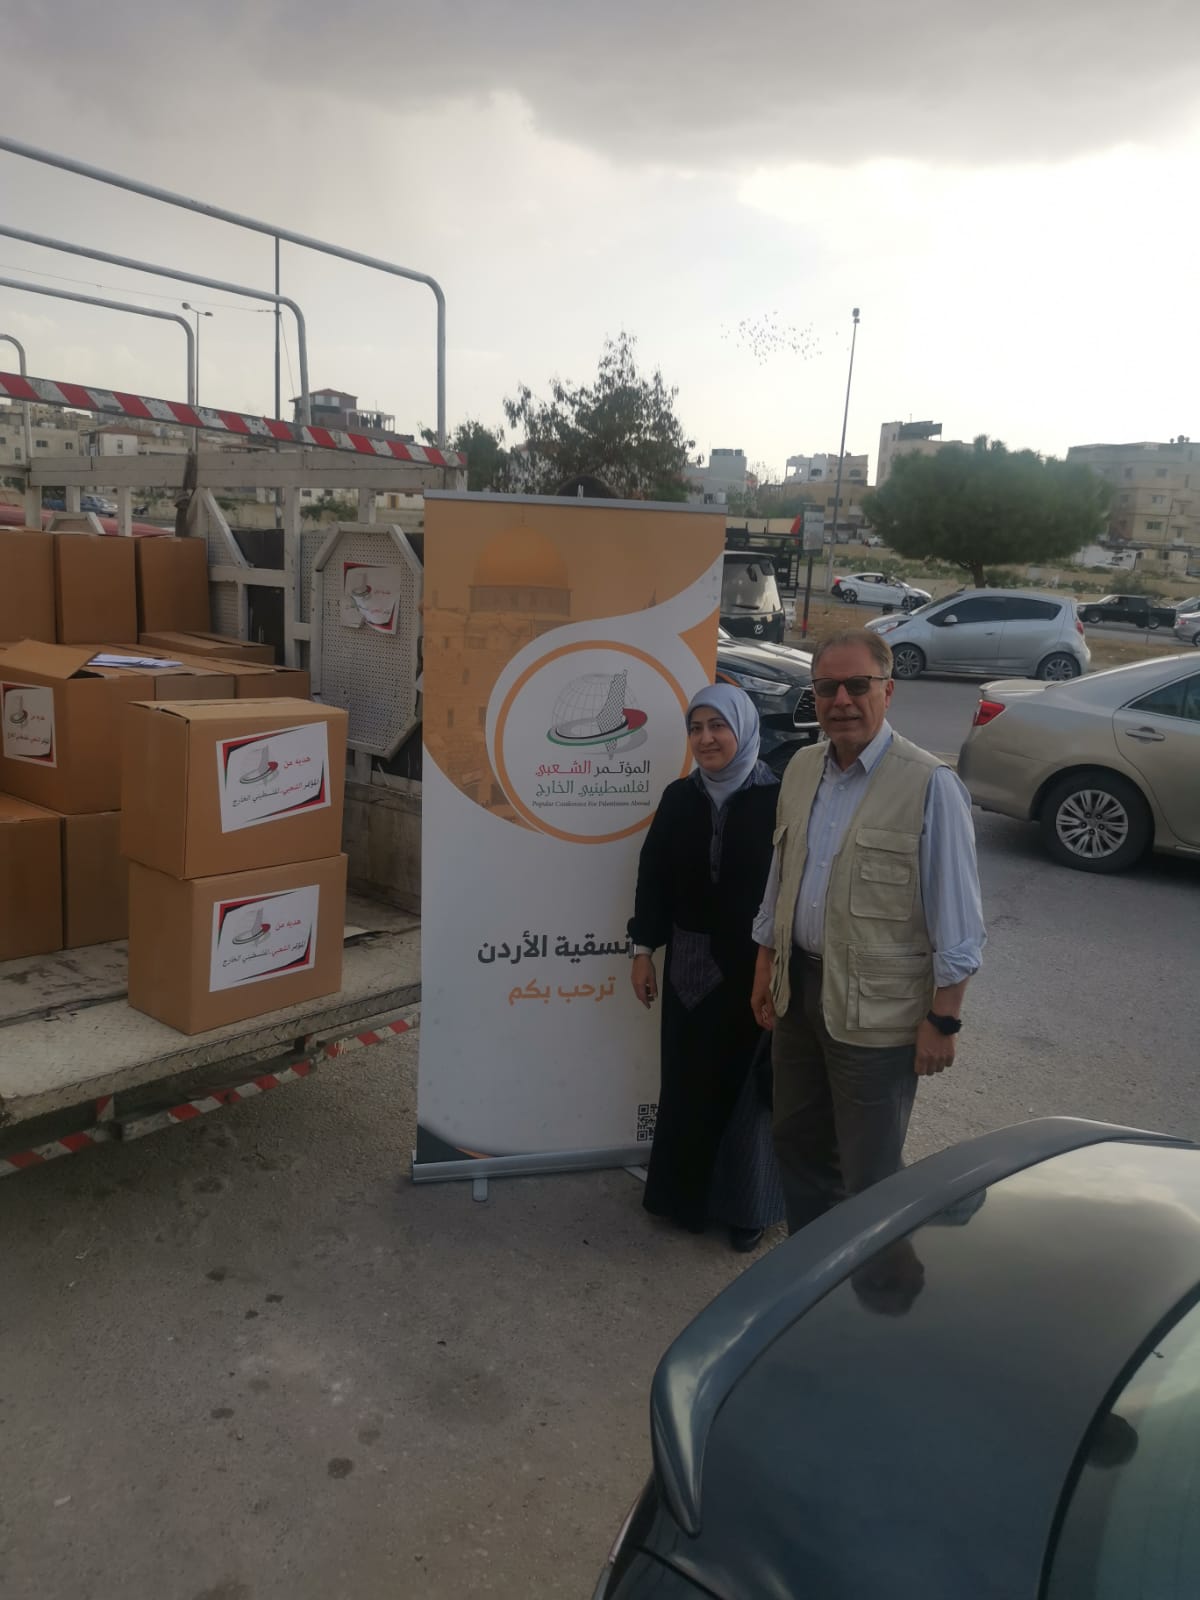 The Popular Conference Implements the "Good Packages" Campaign in Palestinian Refugee Camps in Jordan